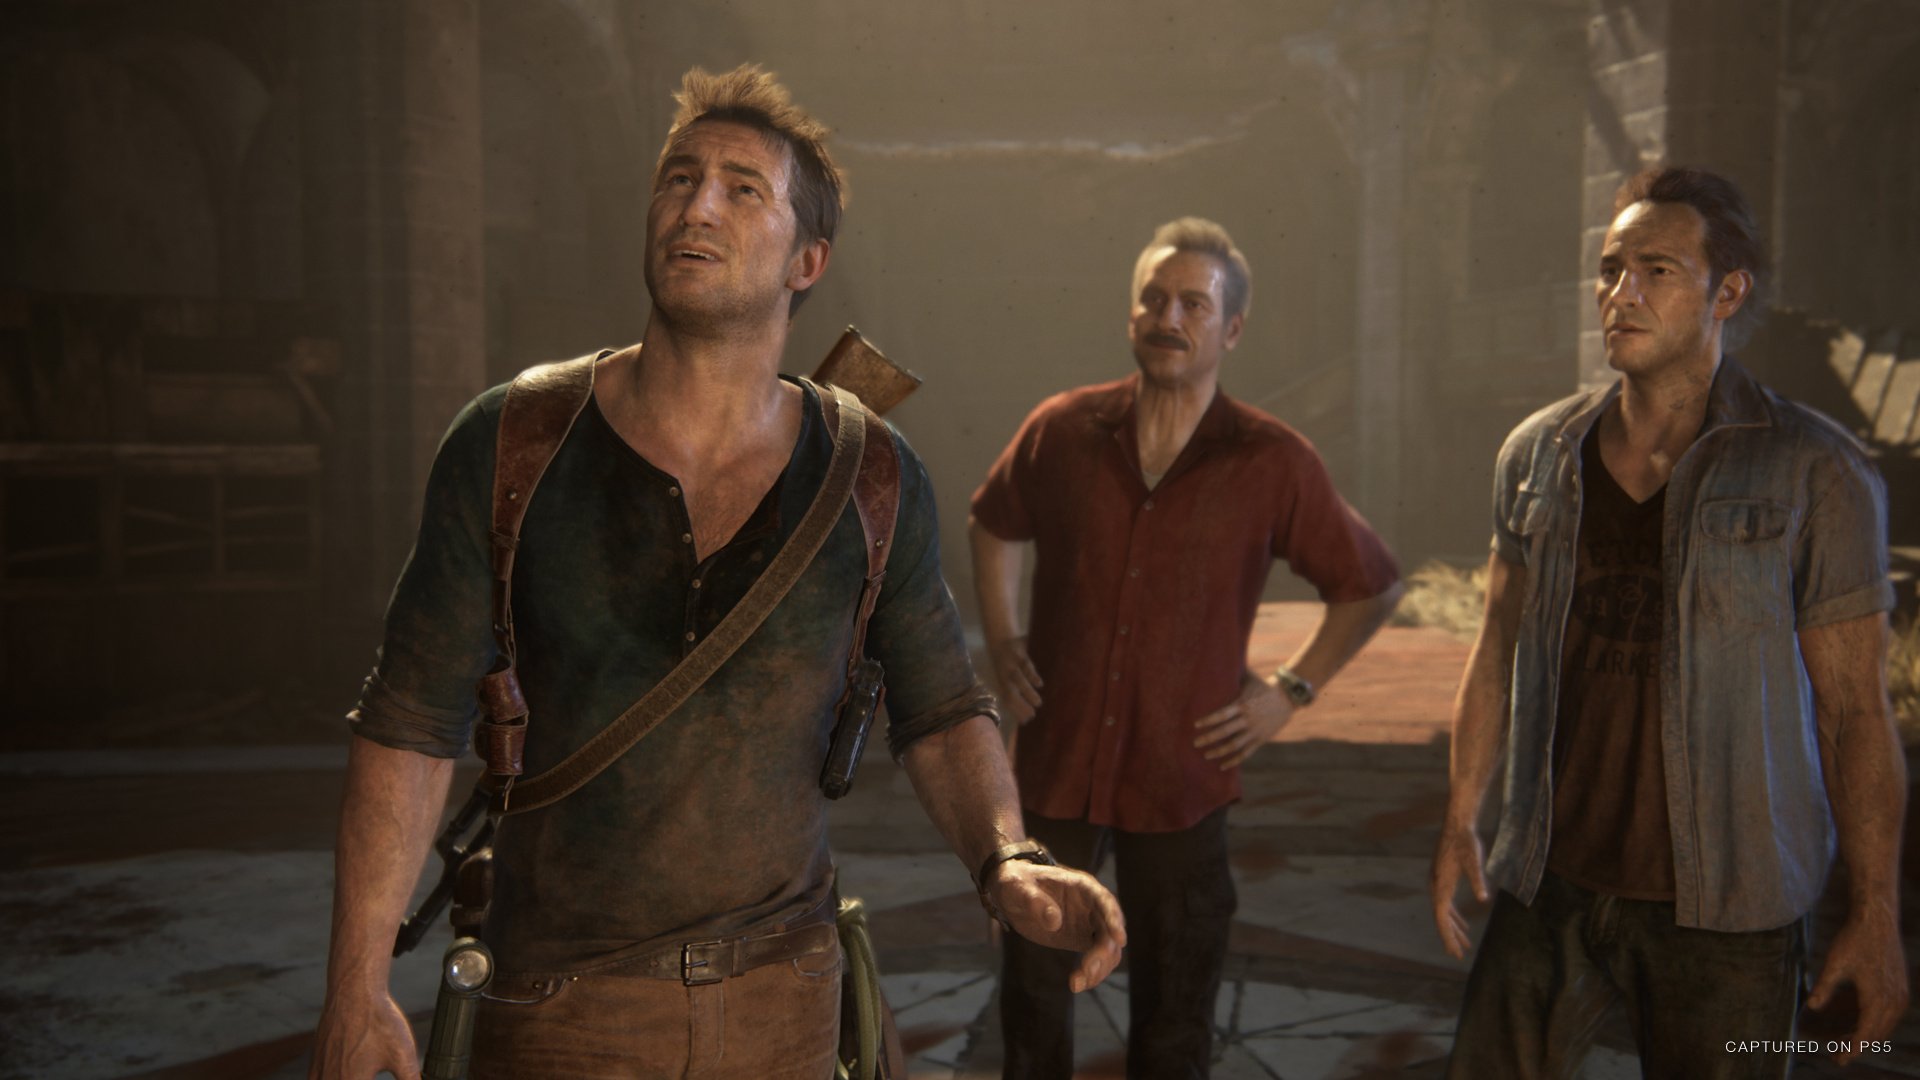 DLC Roll Out: Uncharted 3 Co-op Adventure DLC Brings UNCHARTED